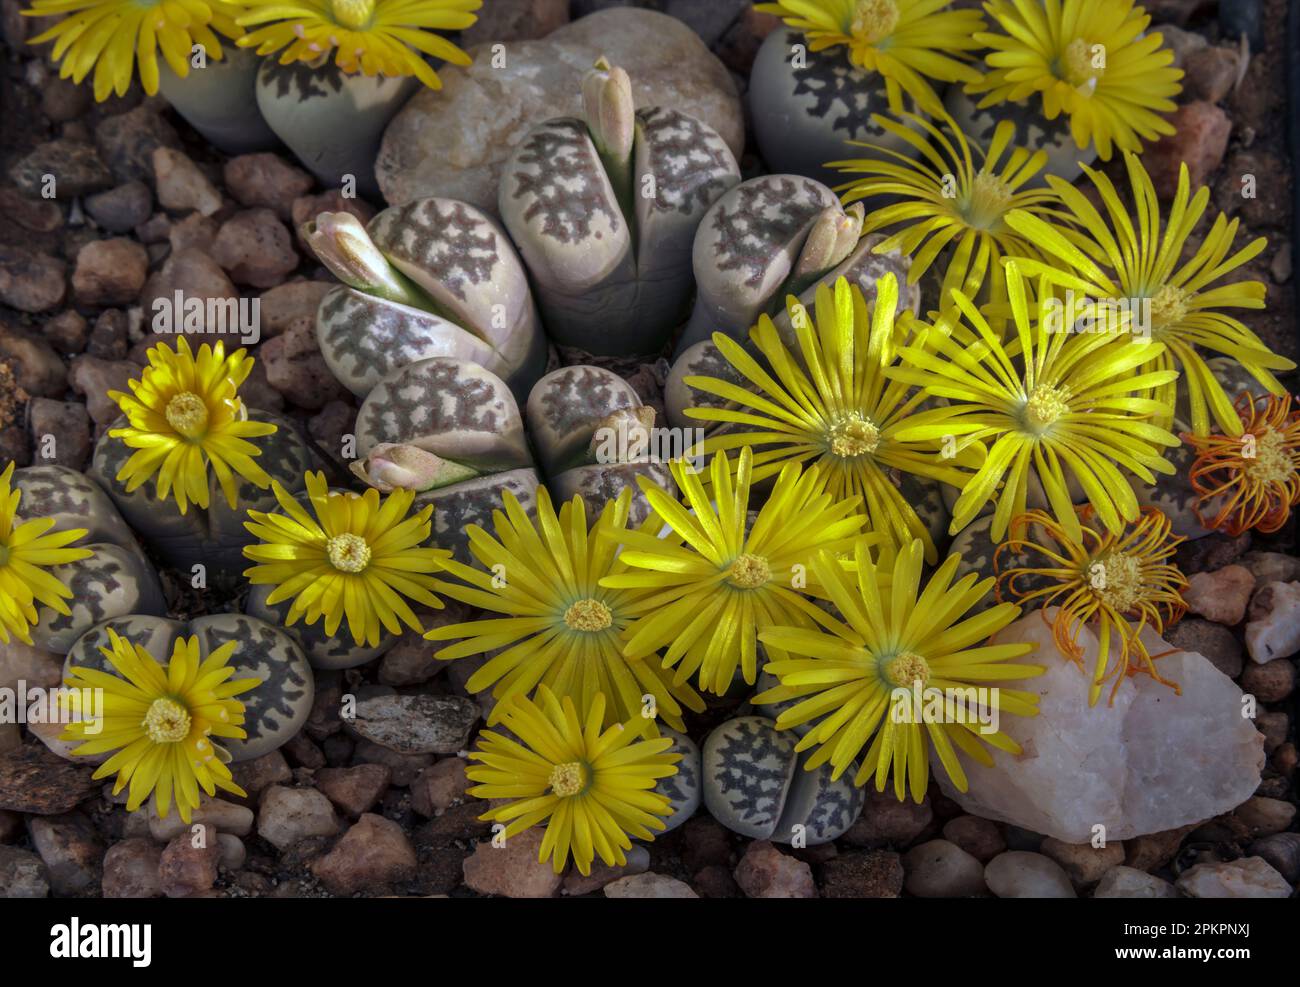 Lithops dorotheae is a species of Lithops found in South Africa. It was named after Dorothea Huyssteen, who found the plant in 1935. It grows on fine- Stock Photo